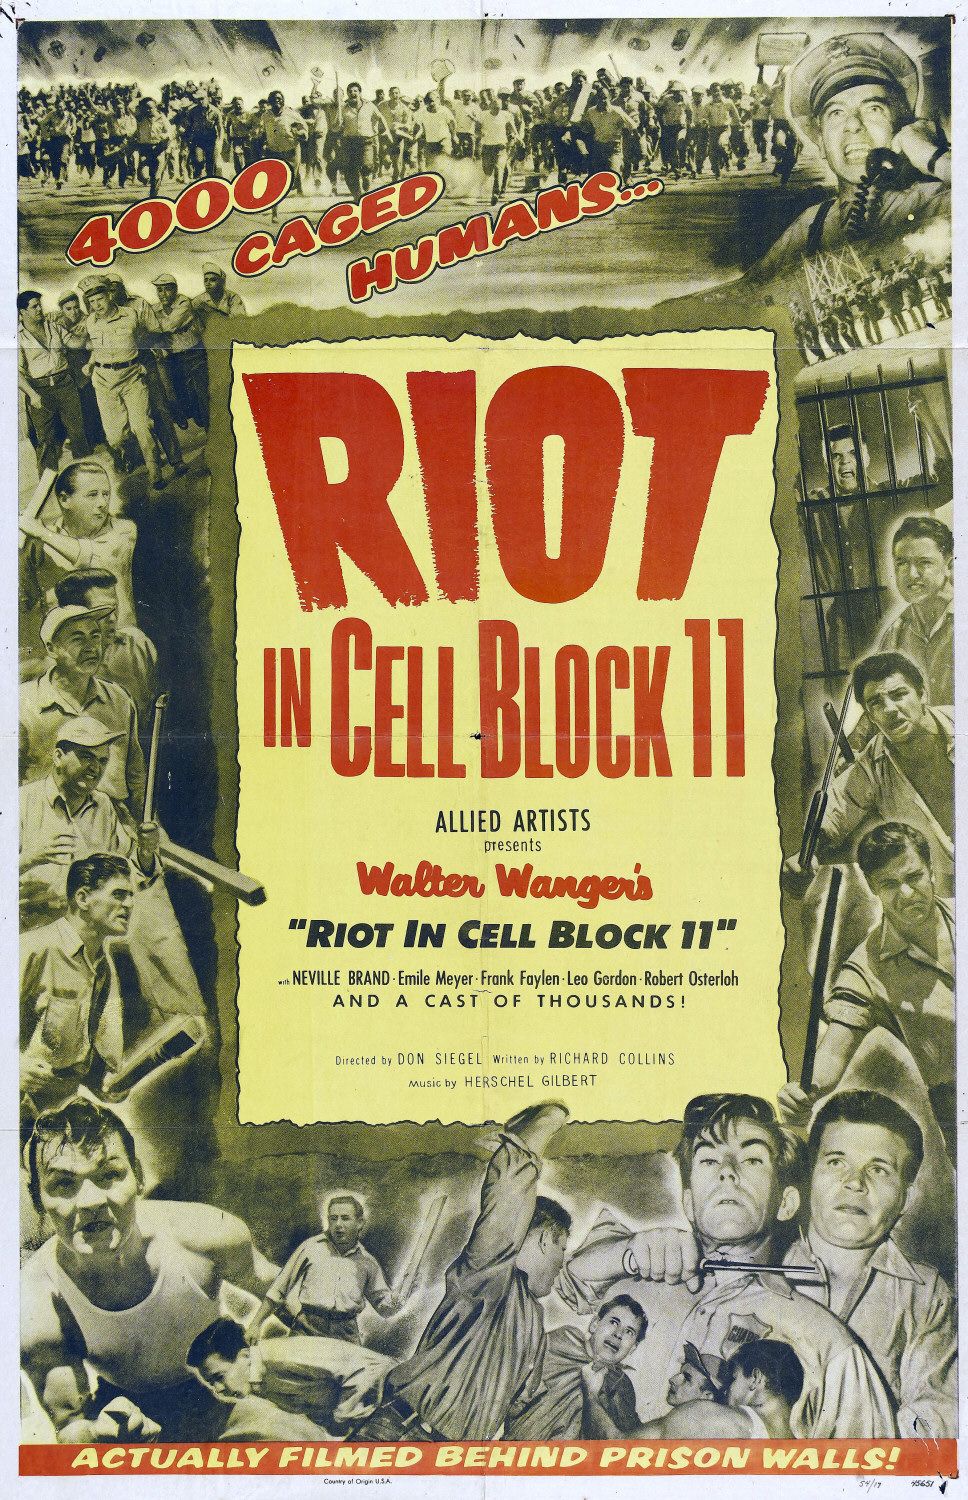 Extra Large Movie Poster Image for Riot in Cell Block 11 